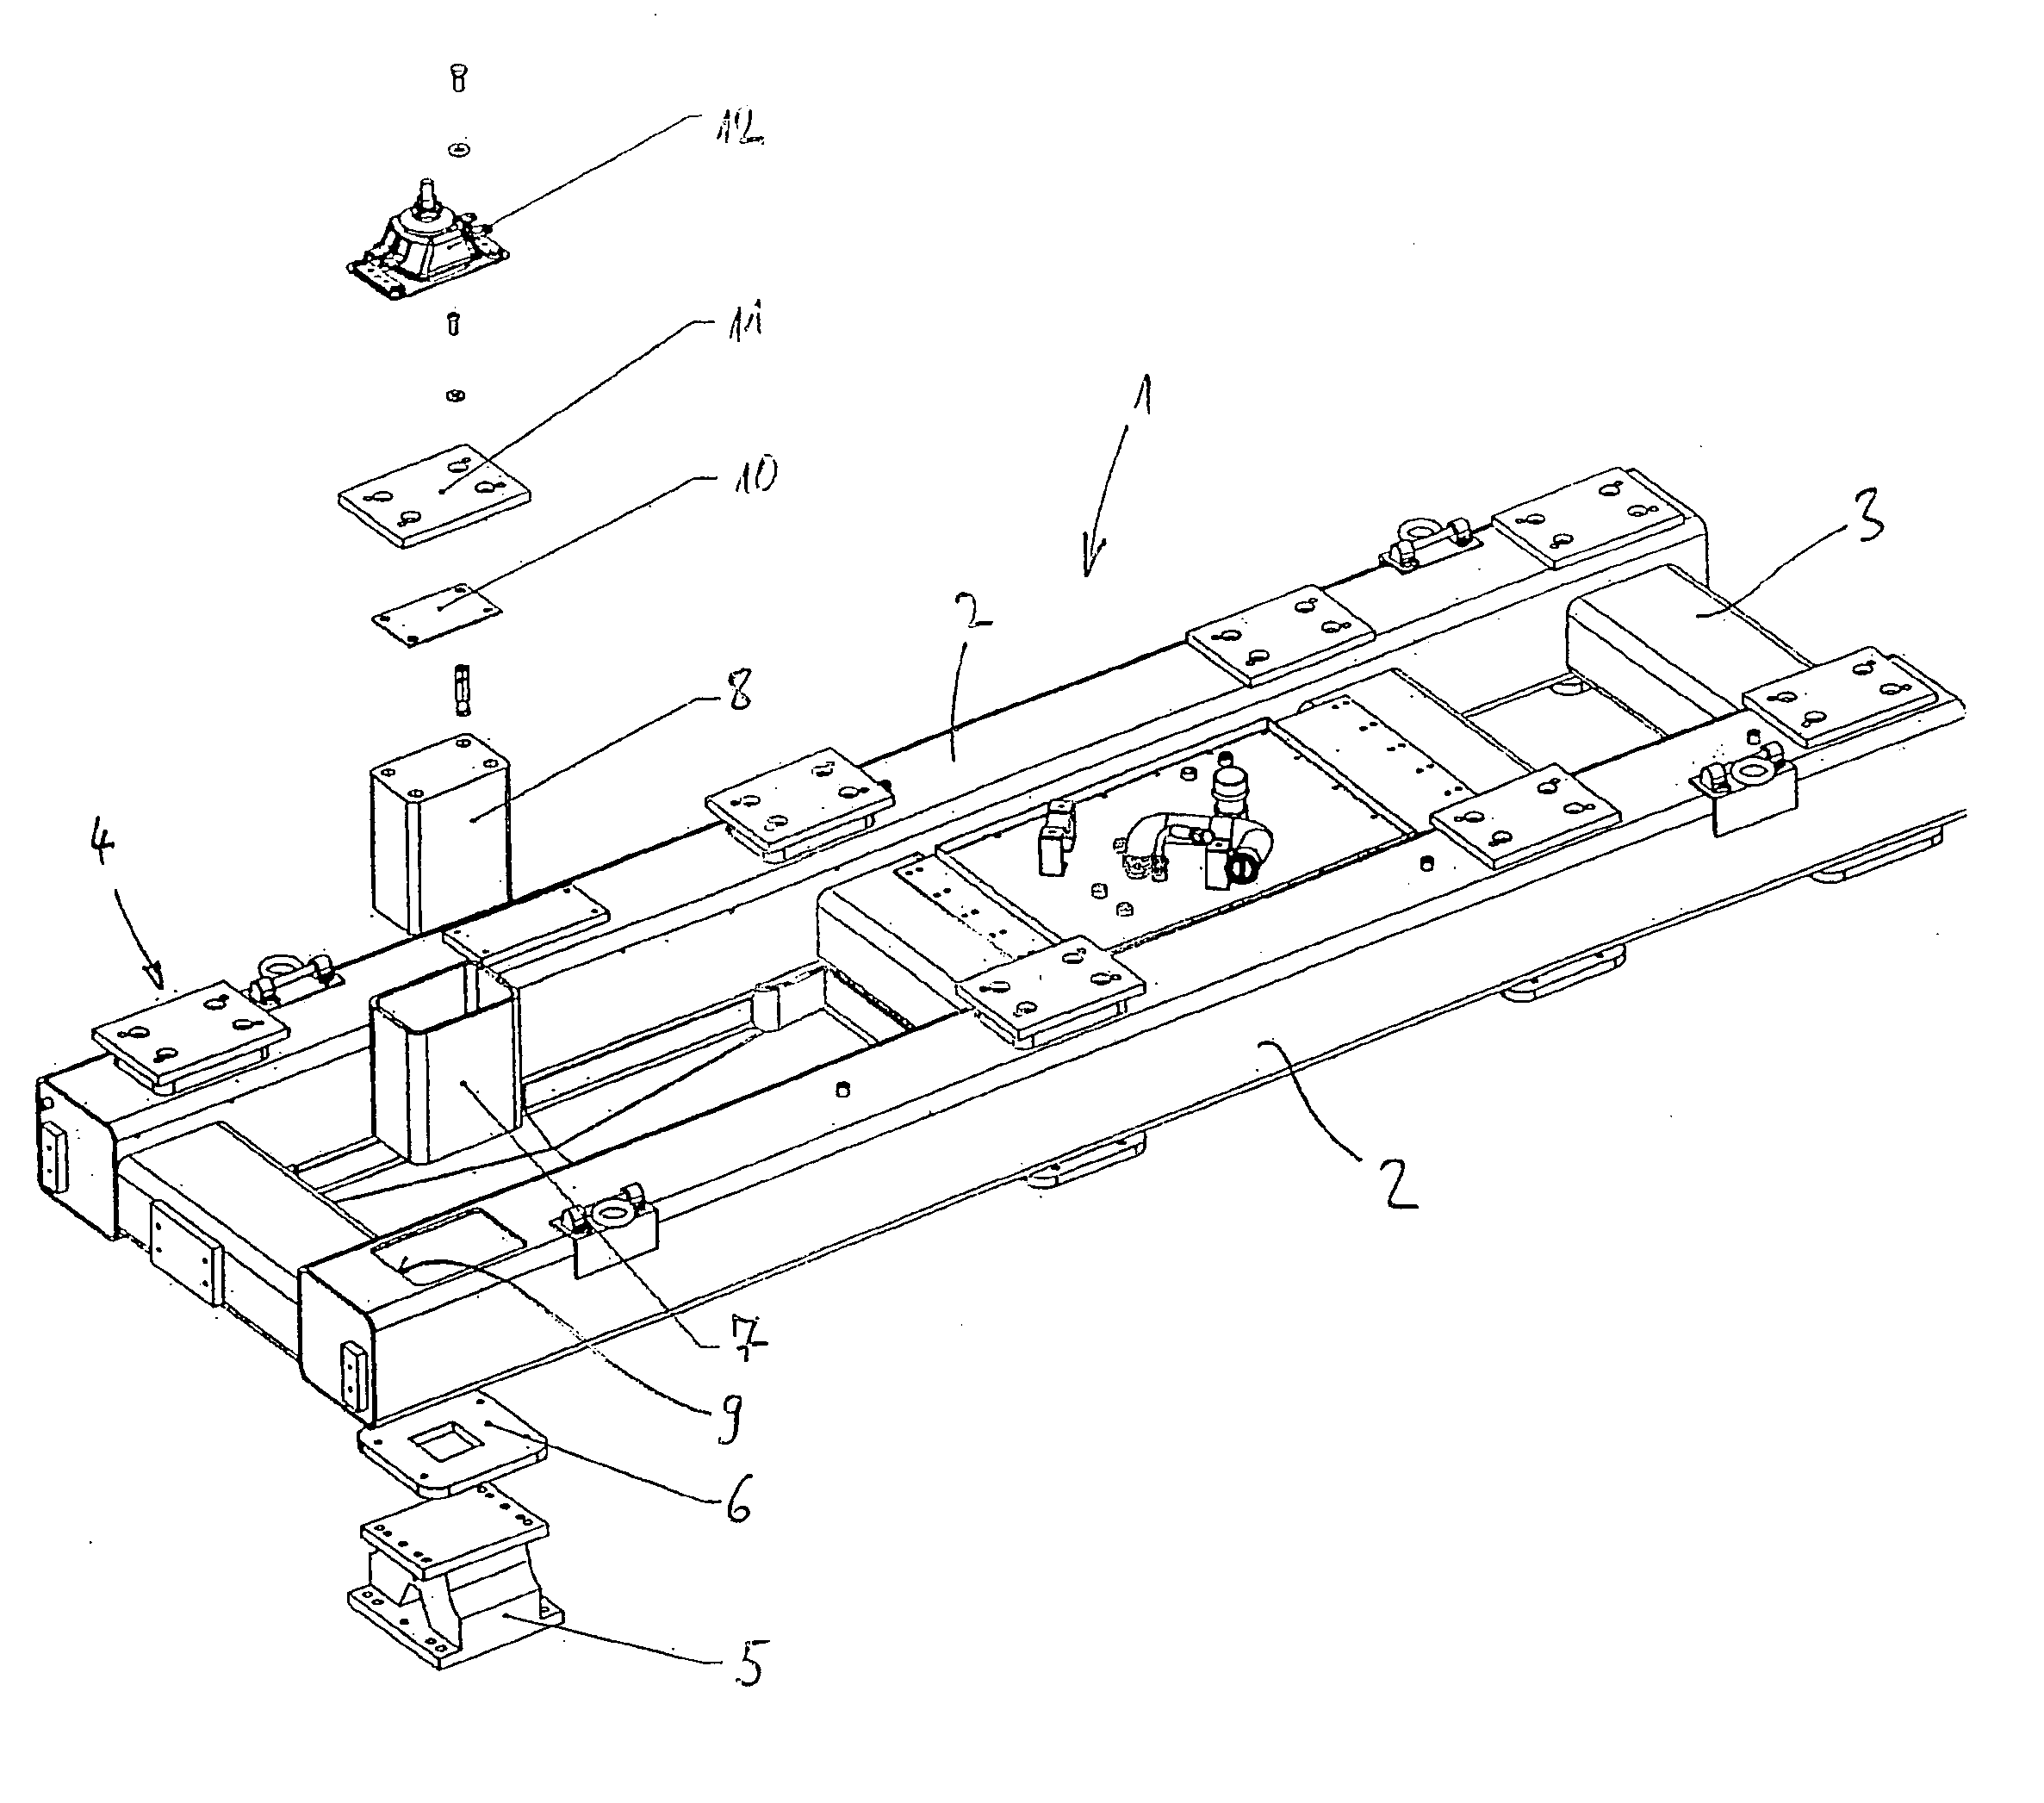 Support frame including longitudinal and transverse beams and method for producing the frame